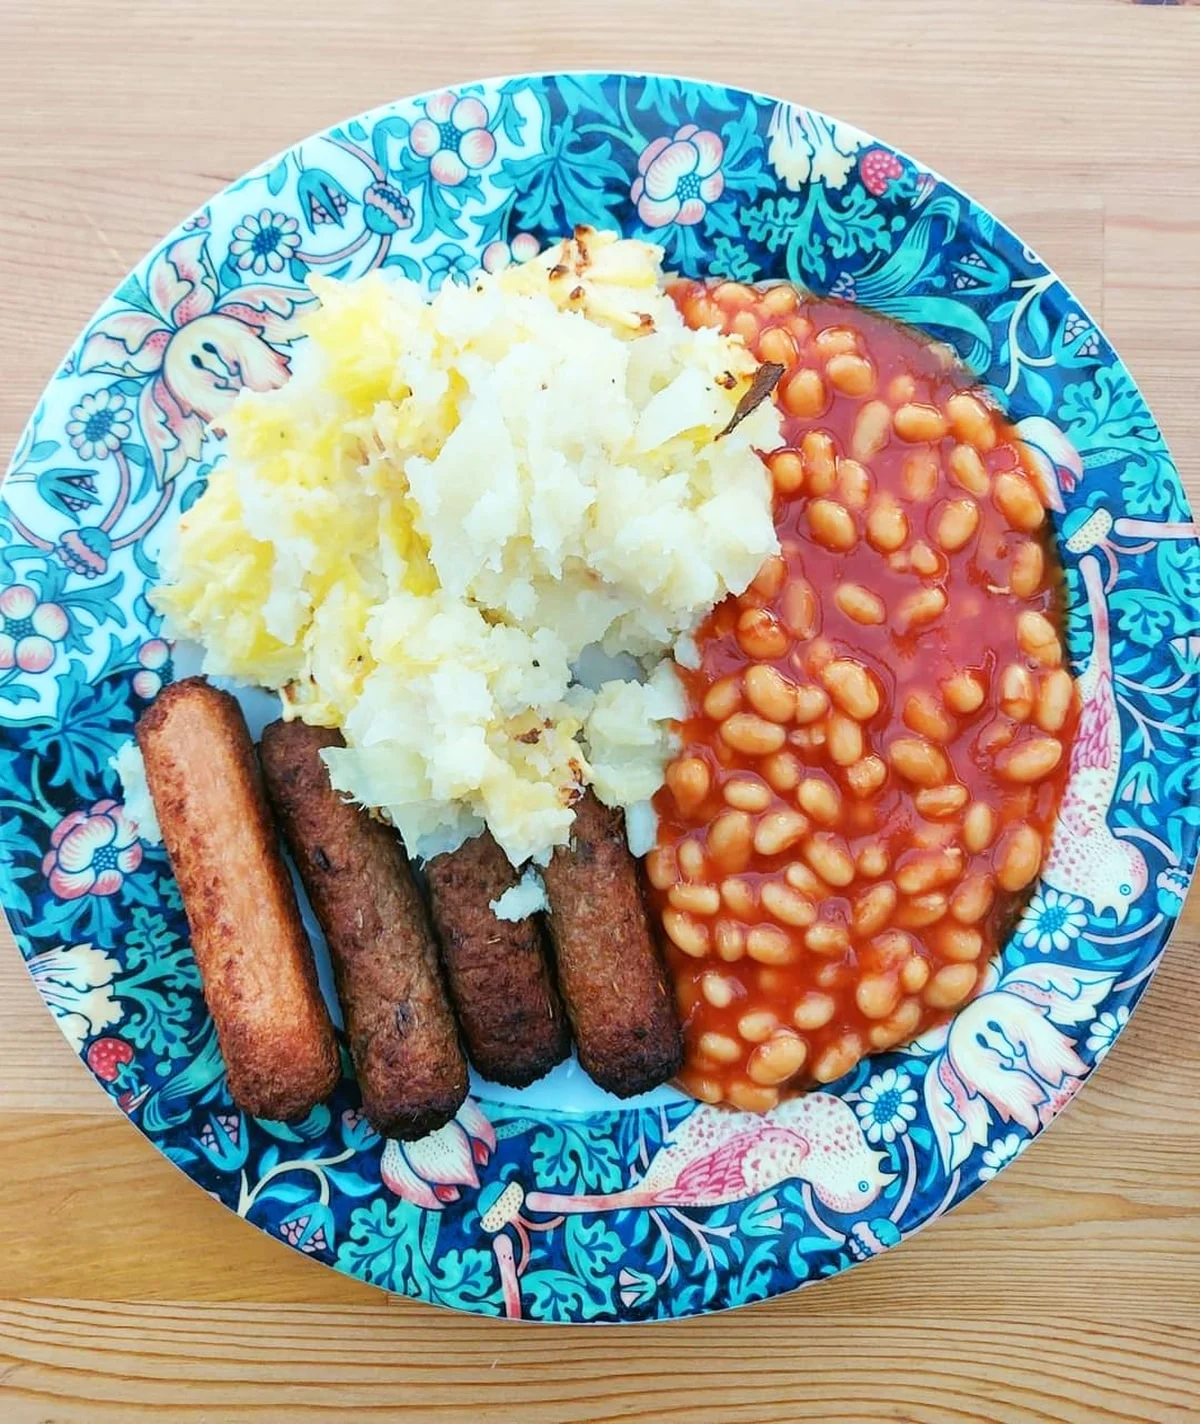 rumbledethumps served with sausages and baked beans